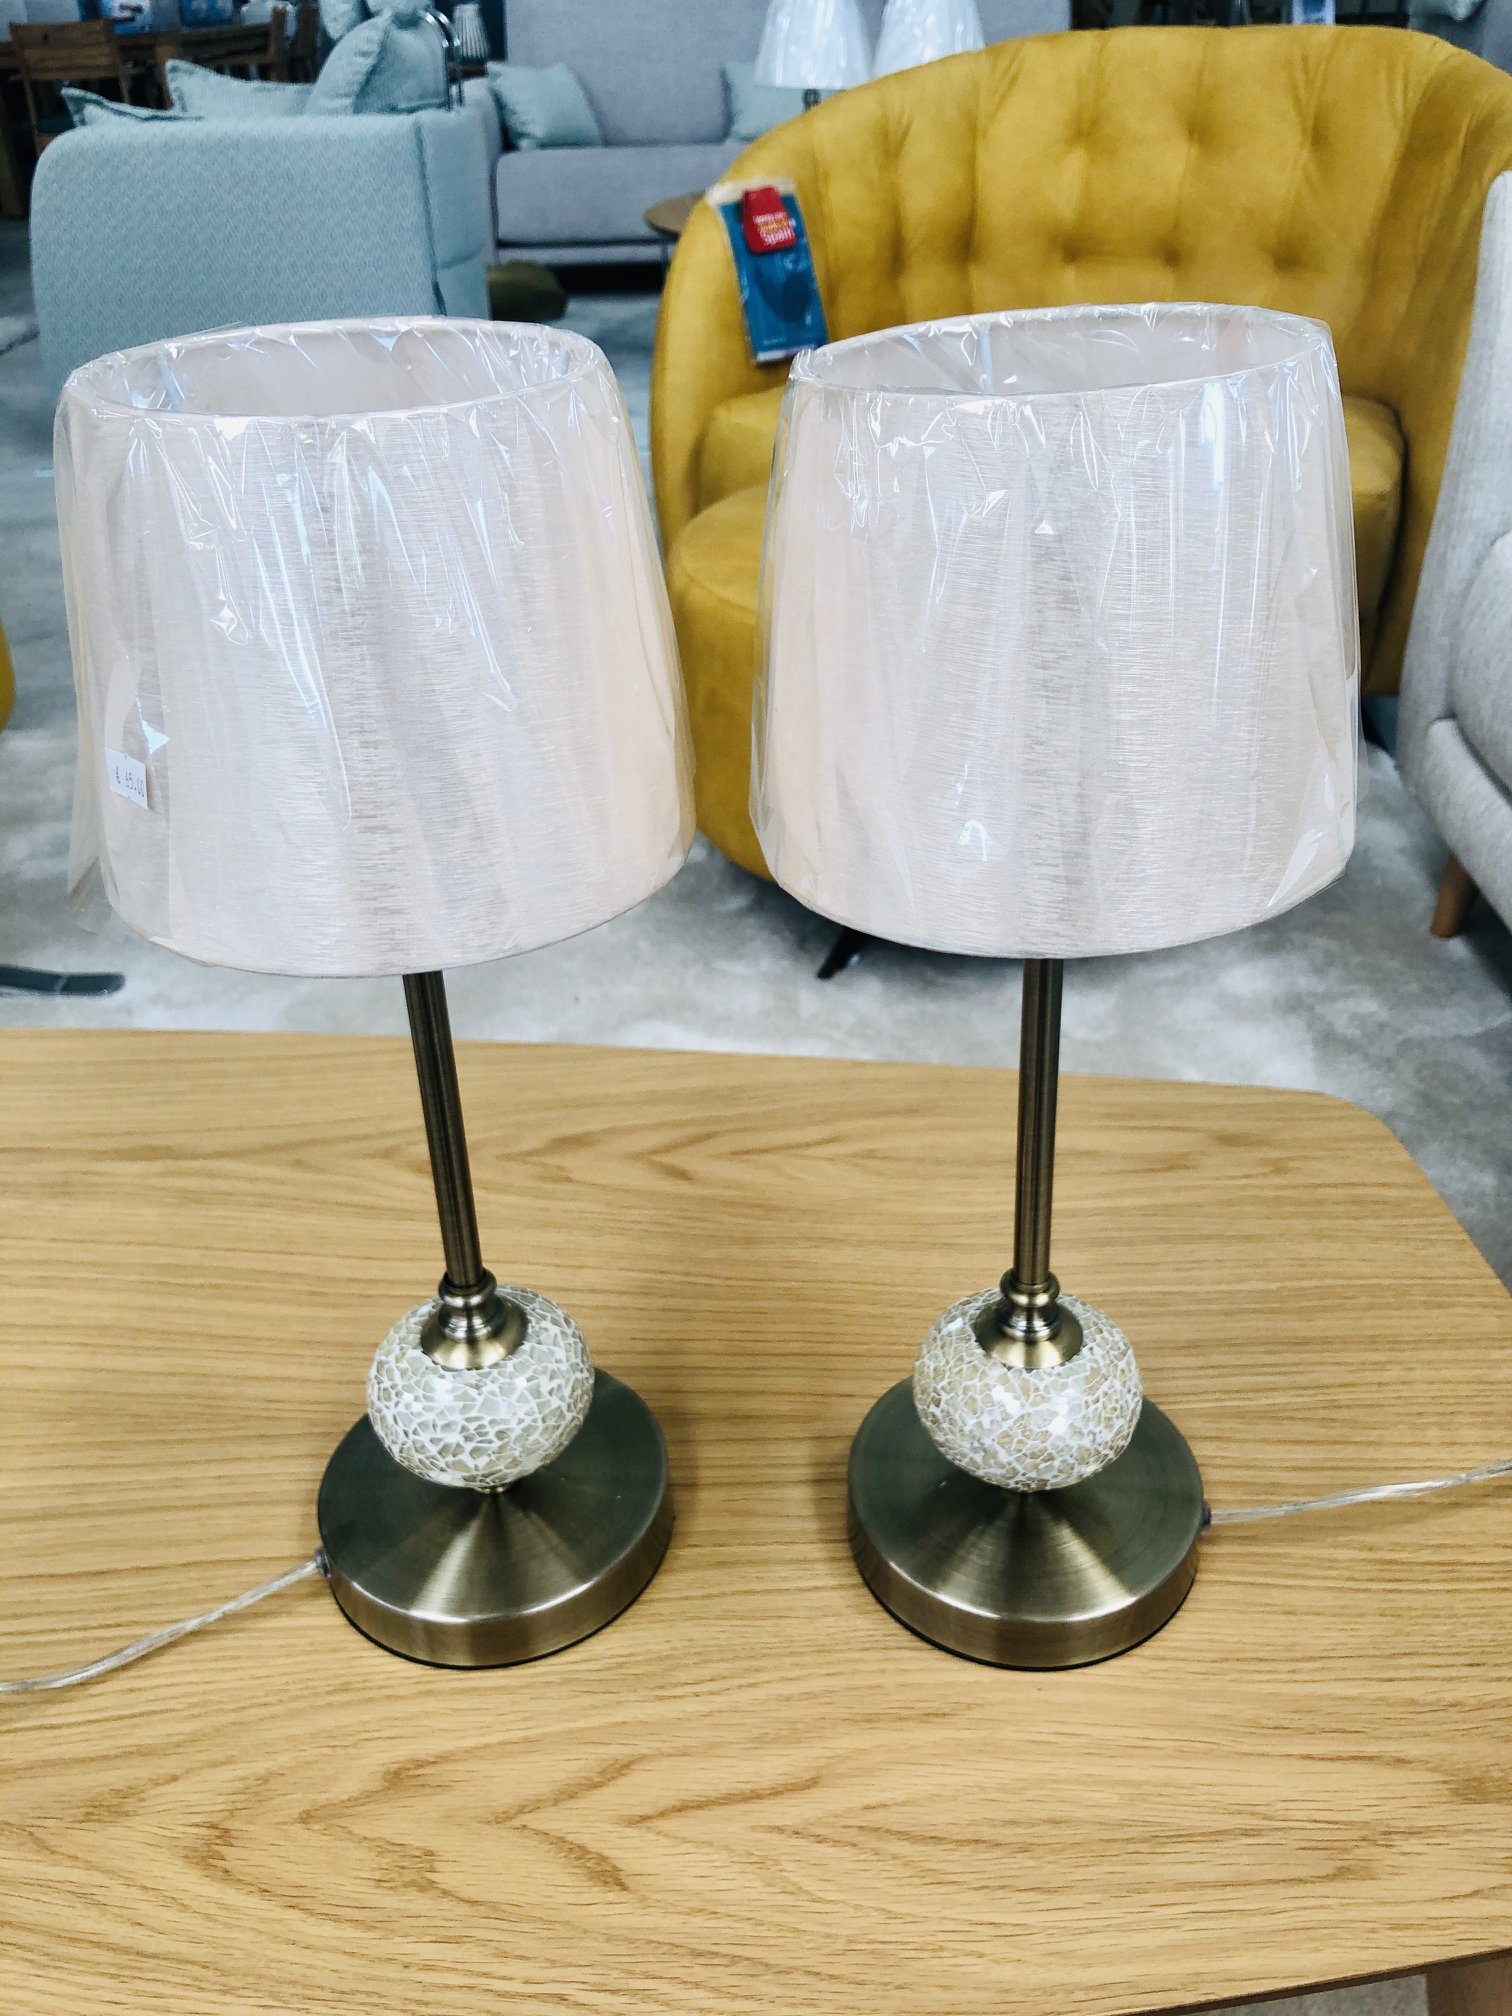 These are just some of the lamps we have for sale at Favells showroom :-)

 » Outdoor Furniture Fuengirola, Costa Del Sol, Spain